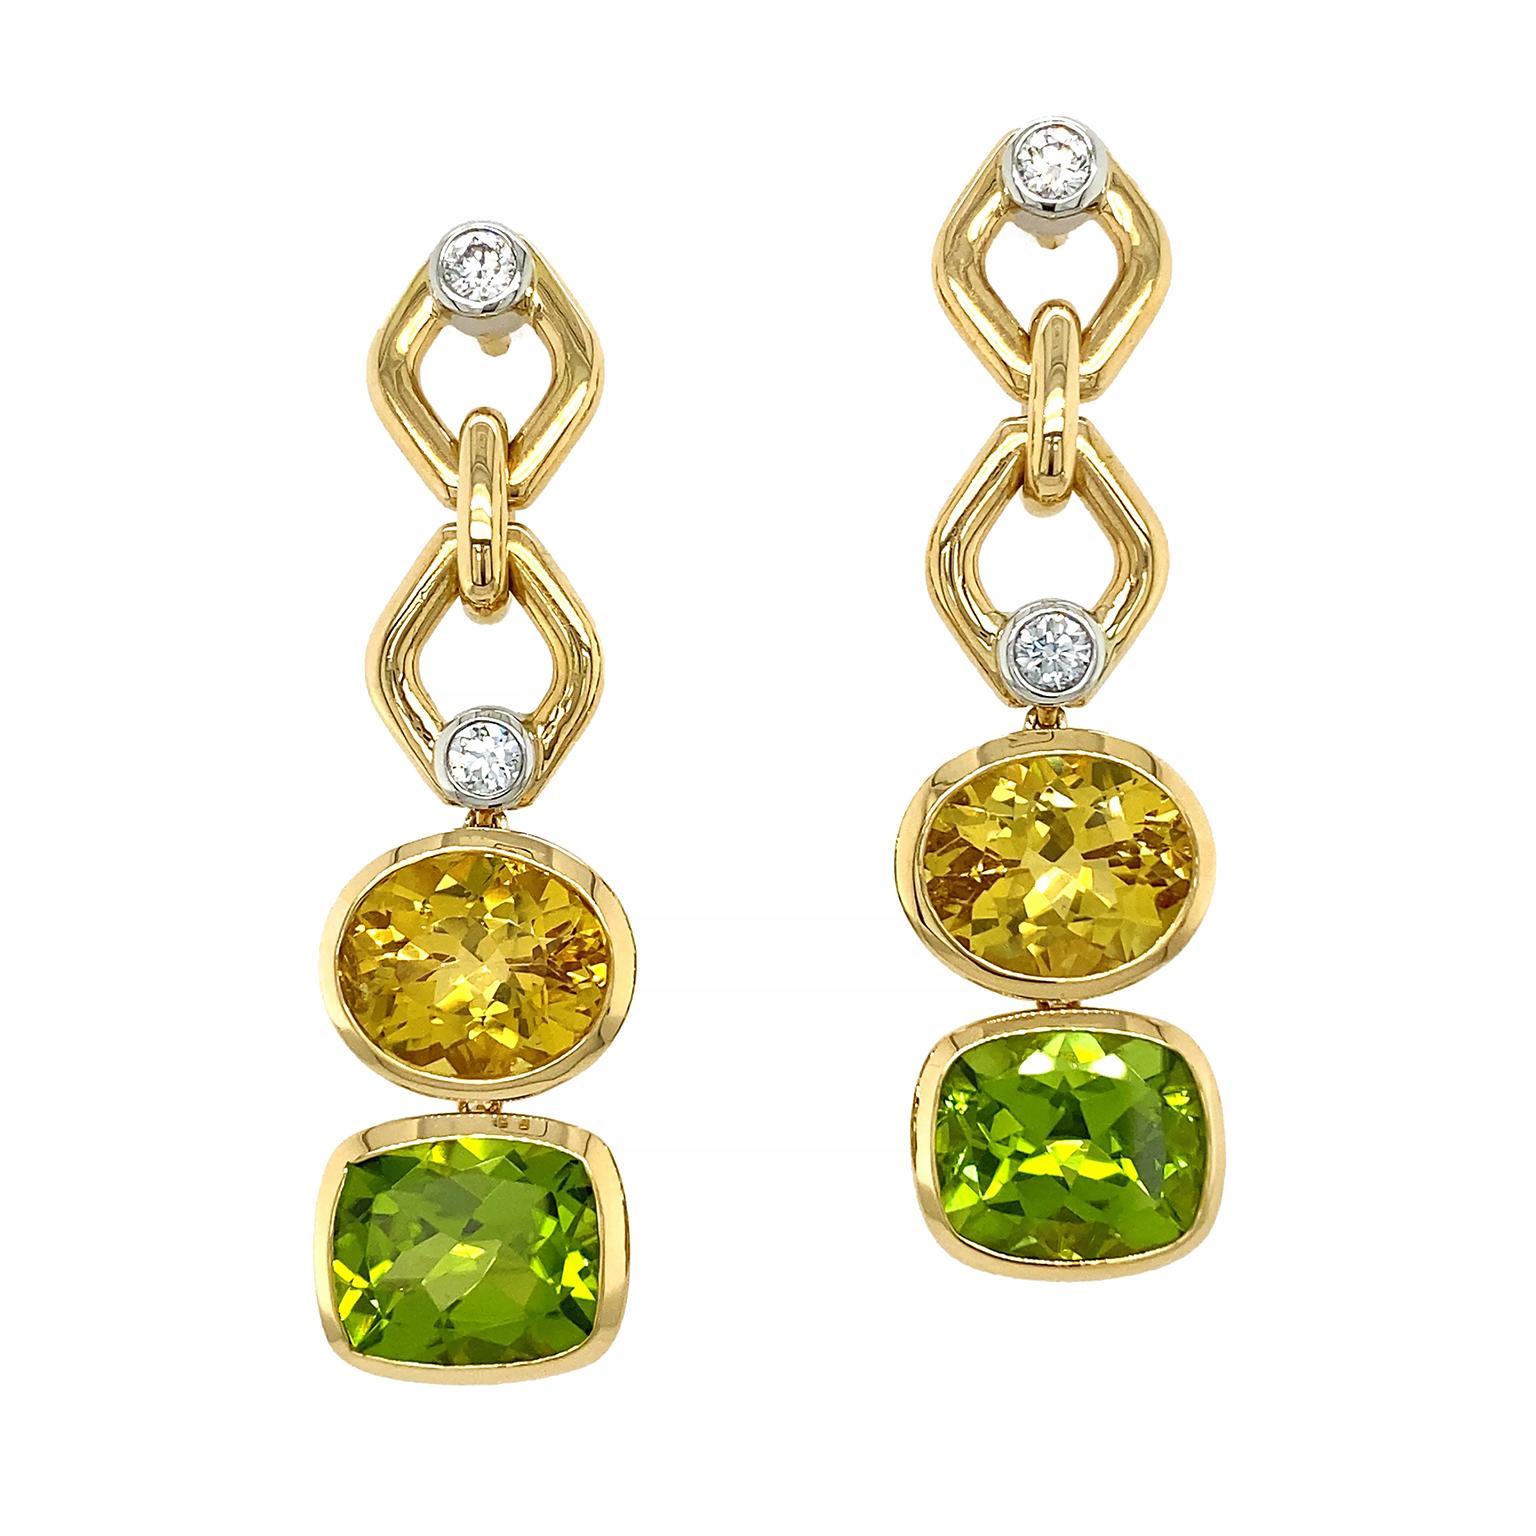 Gold serves as a glinting companion to jewels in these drop earrings. Two rhombuses, with a single brilliant cut diamond, are connected. This leads to an oval shaped deep yellow beryl, following a cushion shaped vibrant peridot. Total weights of the